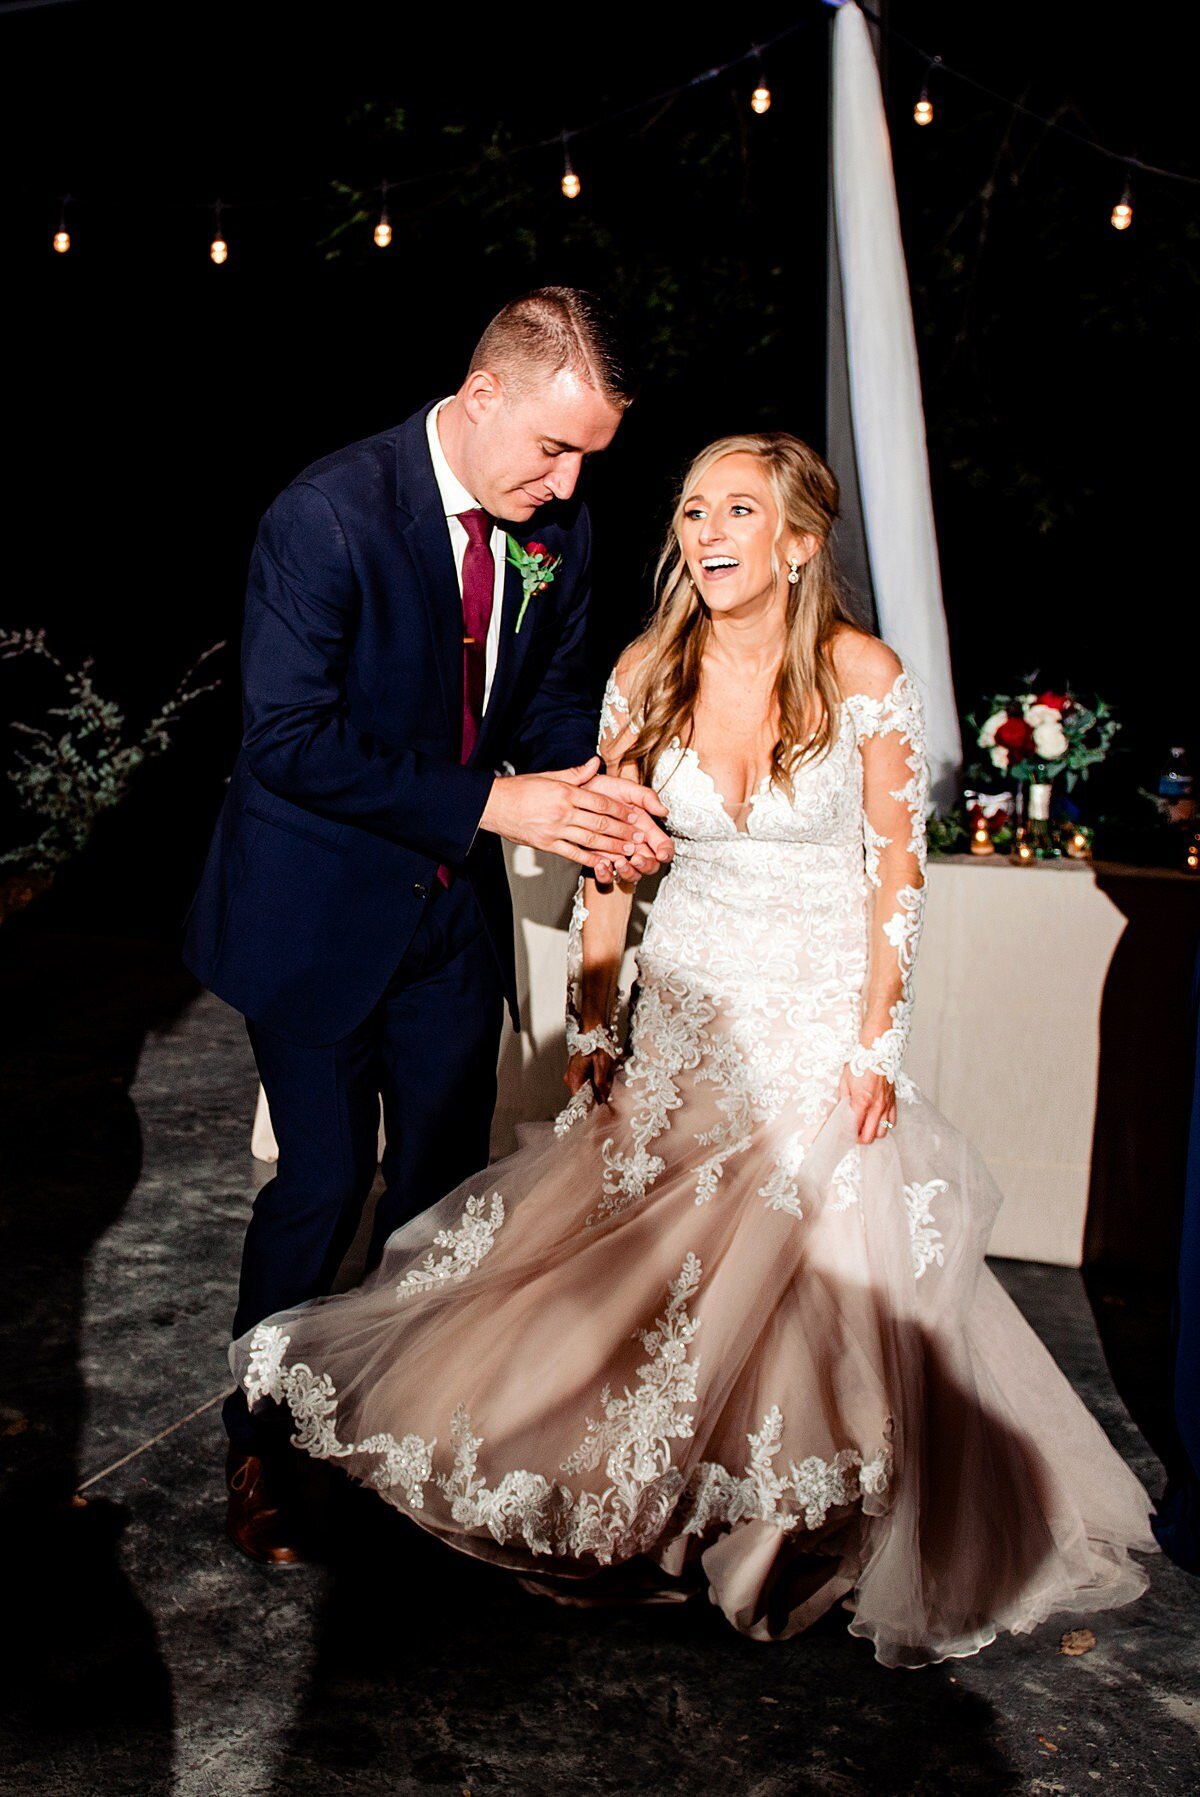 The bride in a long lace wedding gown and the groom in a dark navy suit dance all night long